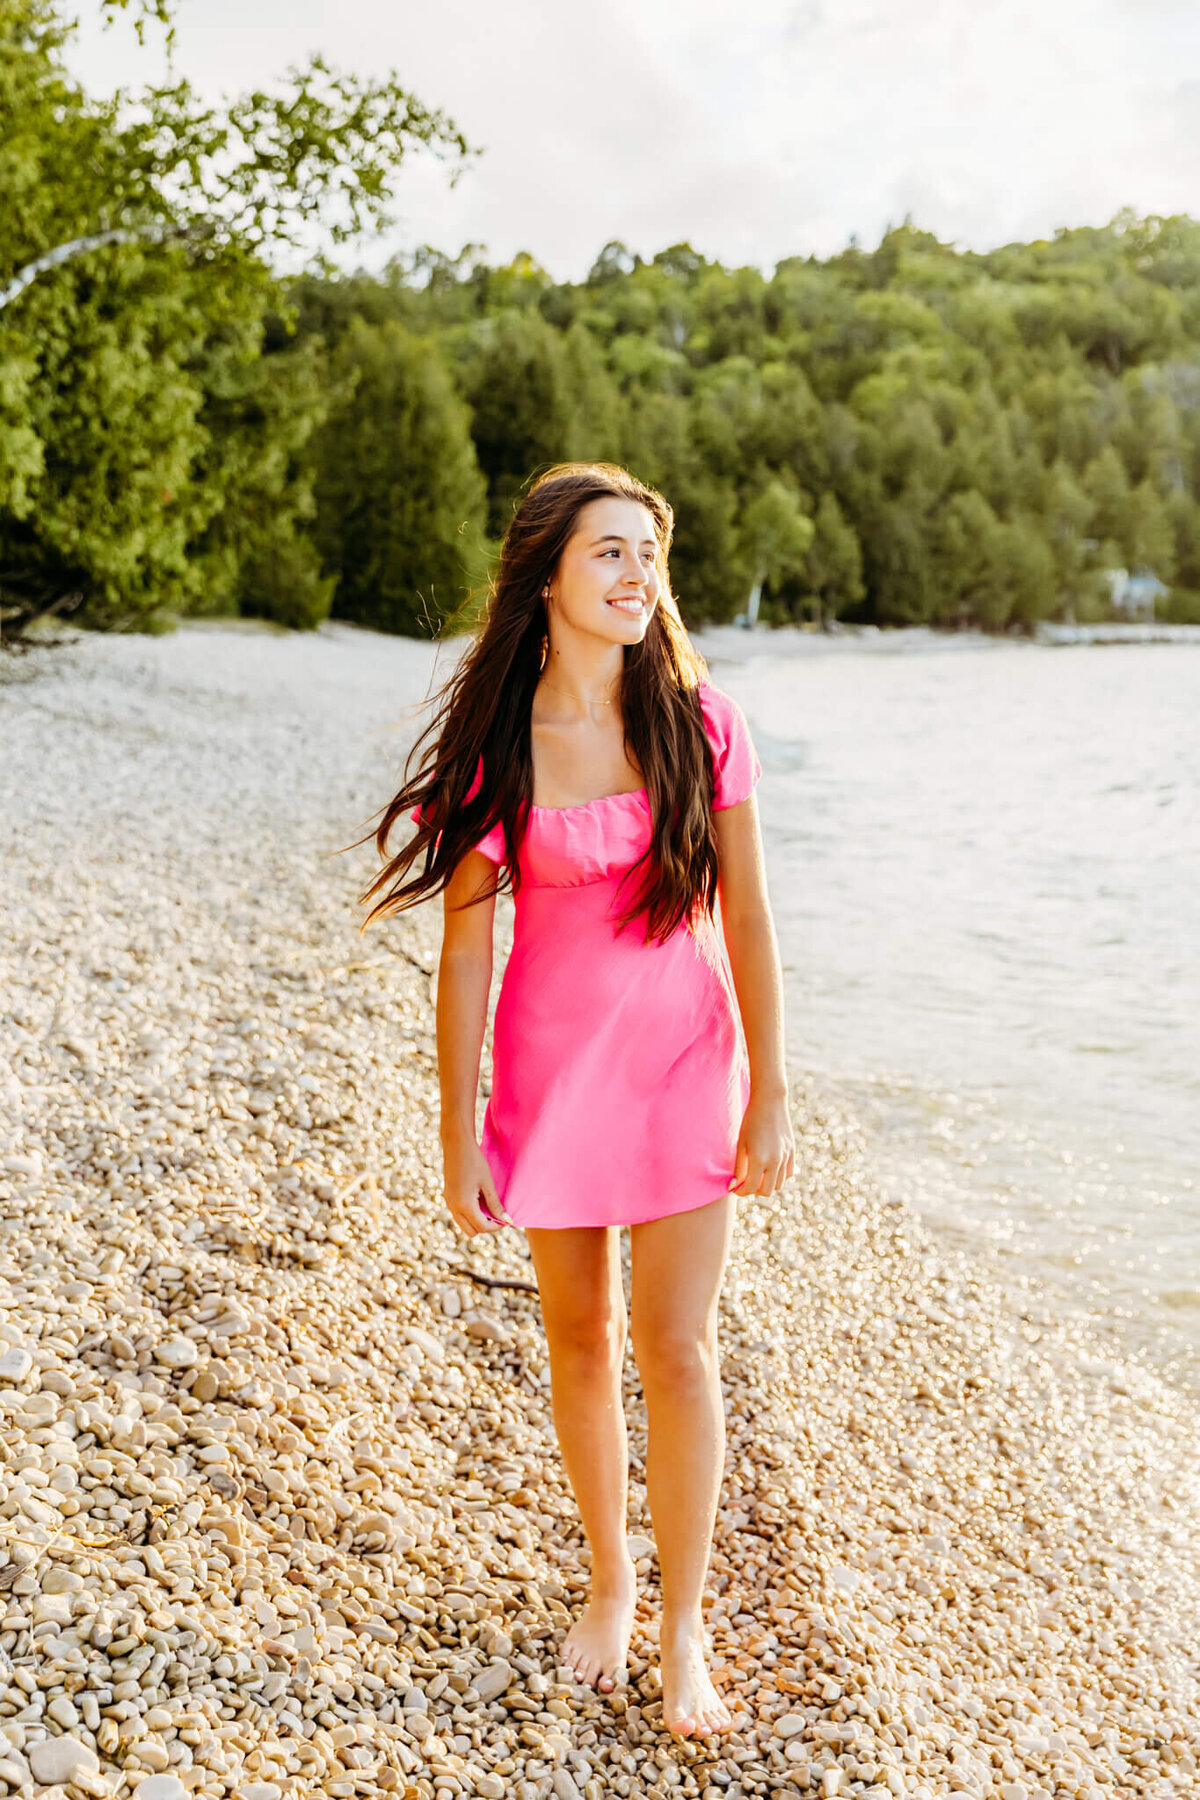 pretty senior girl in a pink dress walking on a rocky beach at sunset captured by Ashley Kalbus